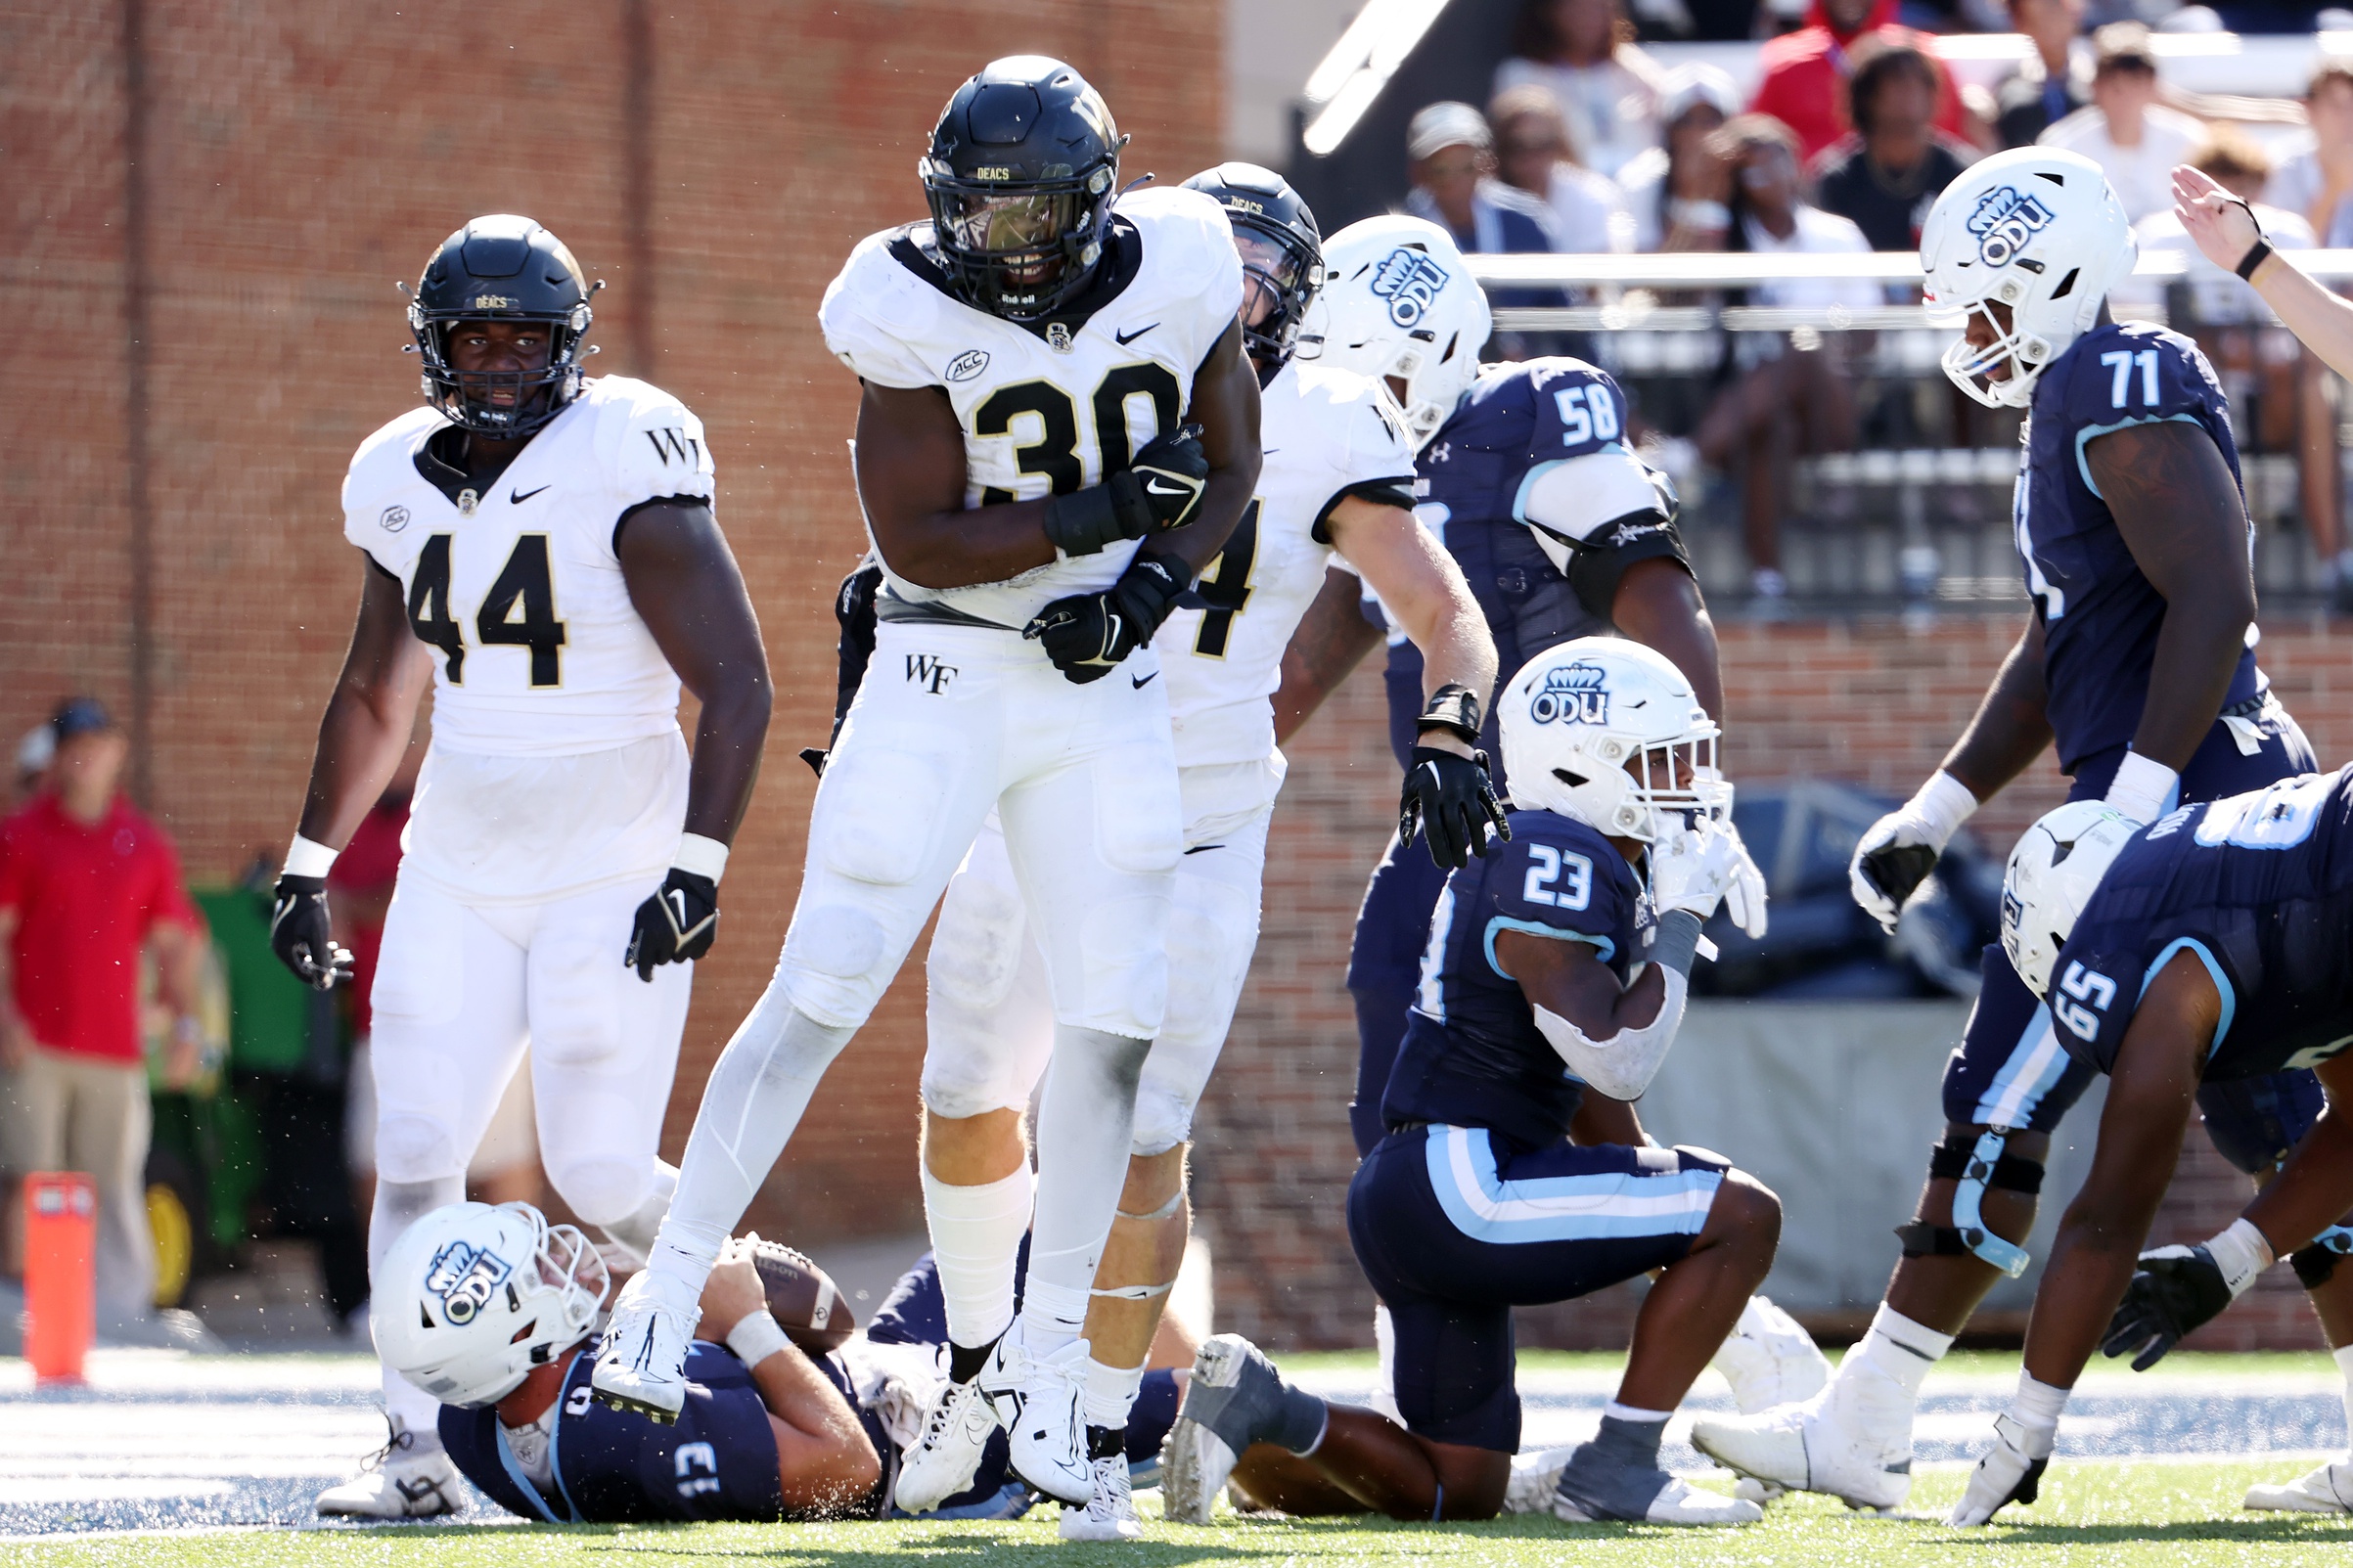 Wake Forest Defense Undergoes Major Changes with New Practice Approach